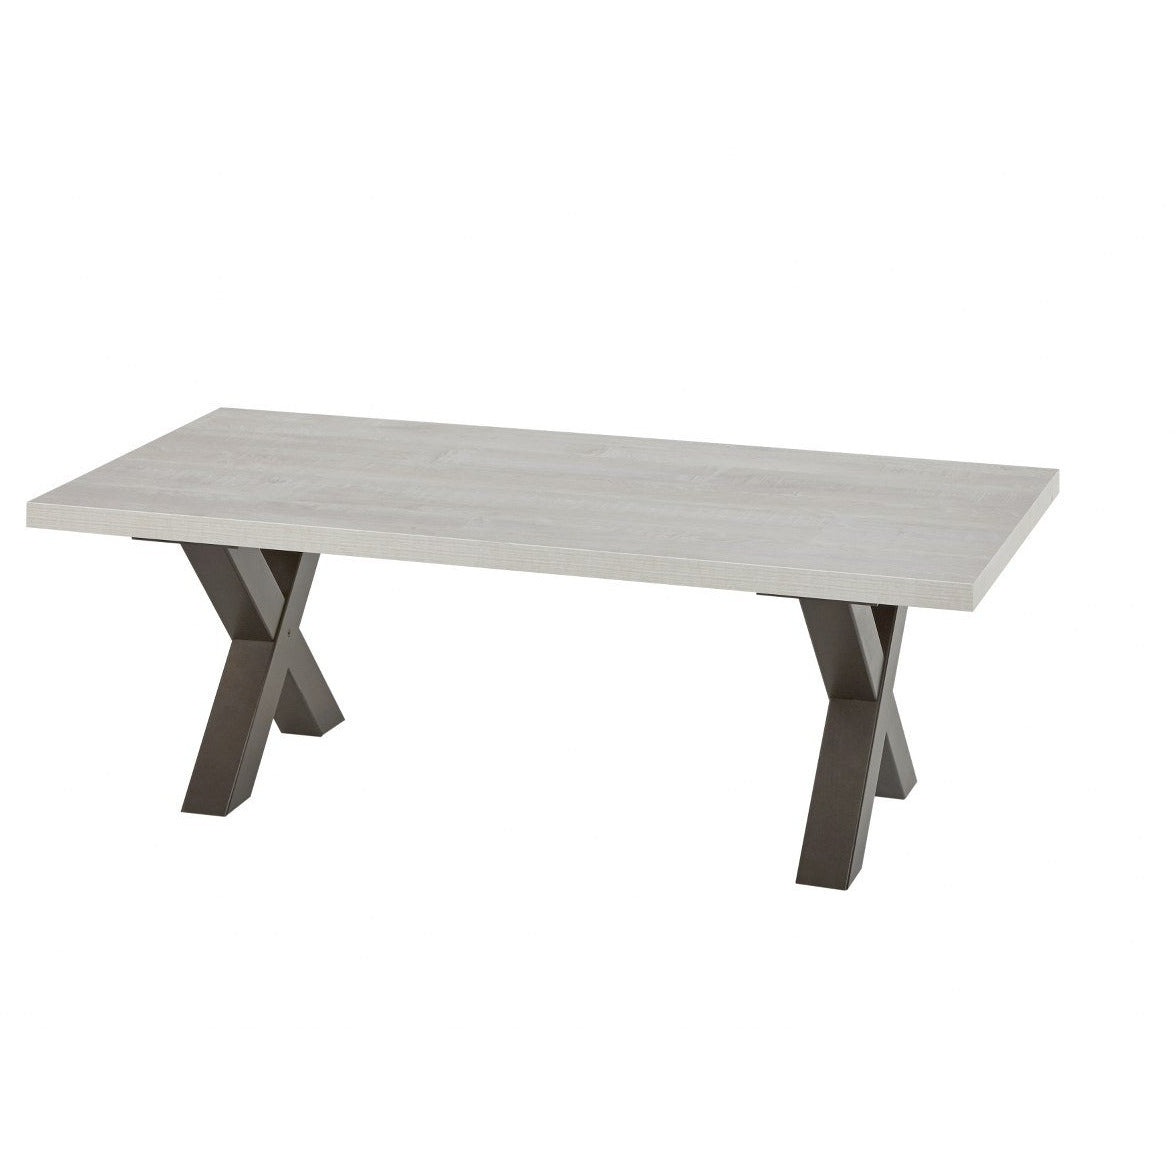 Table | Furniture series Vento | light gray, natural